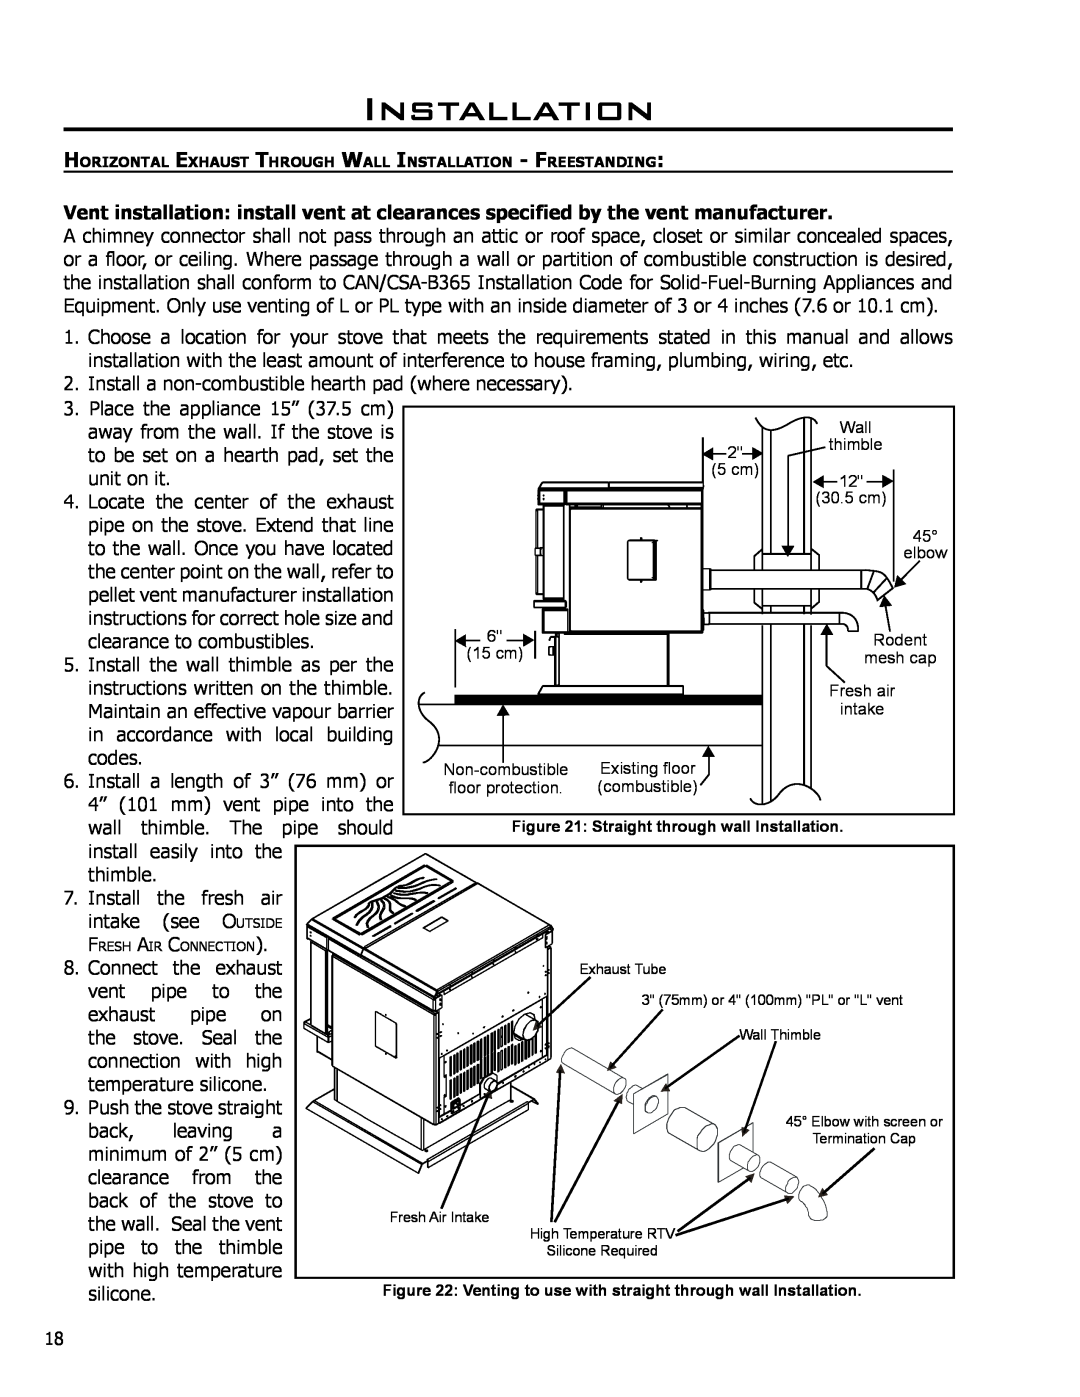 Enviro EF-119 owner manual Installation, stove, Wall, thimble, 30.5 cm, elbow, Existing floor, combustible 